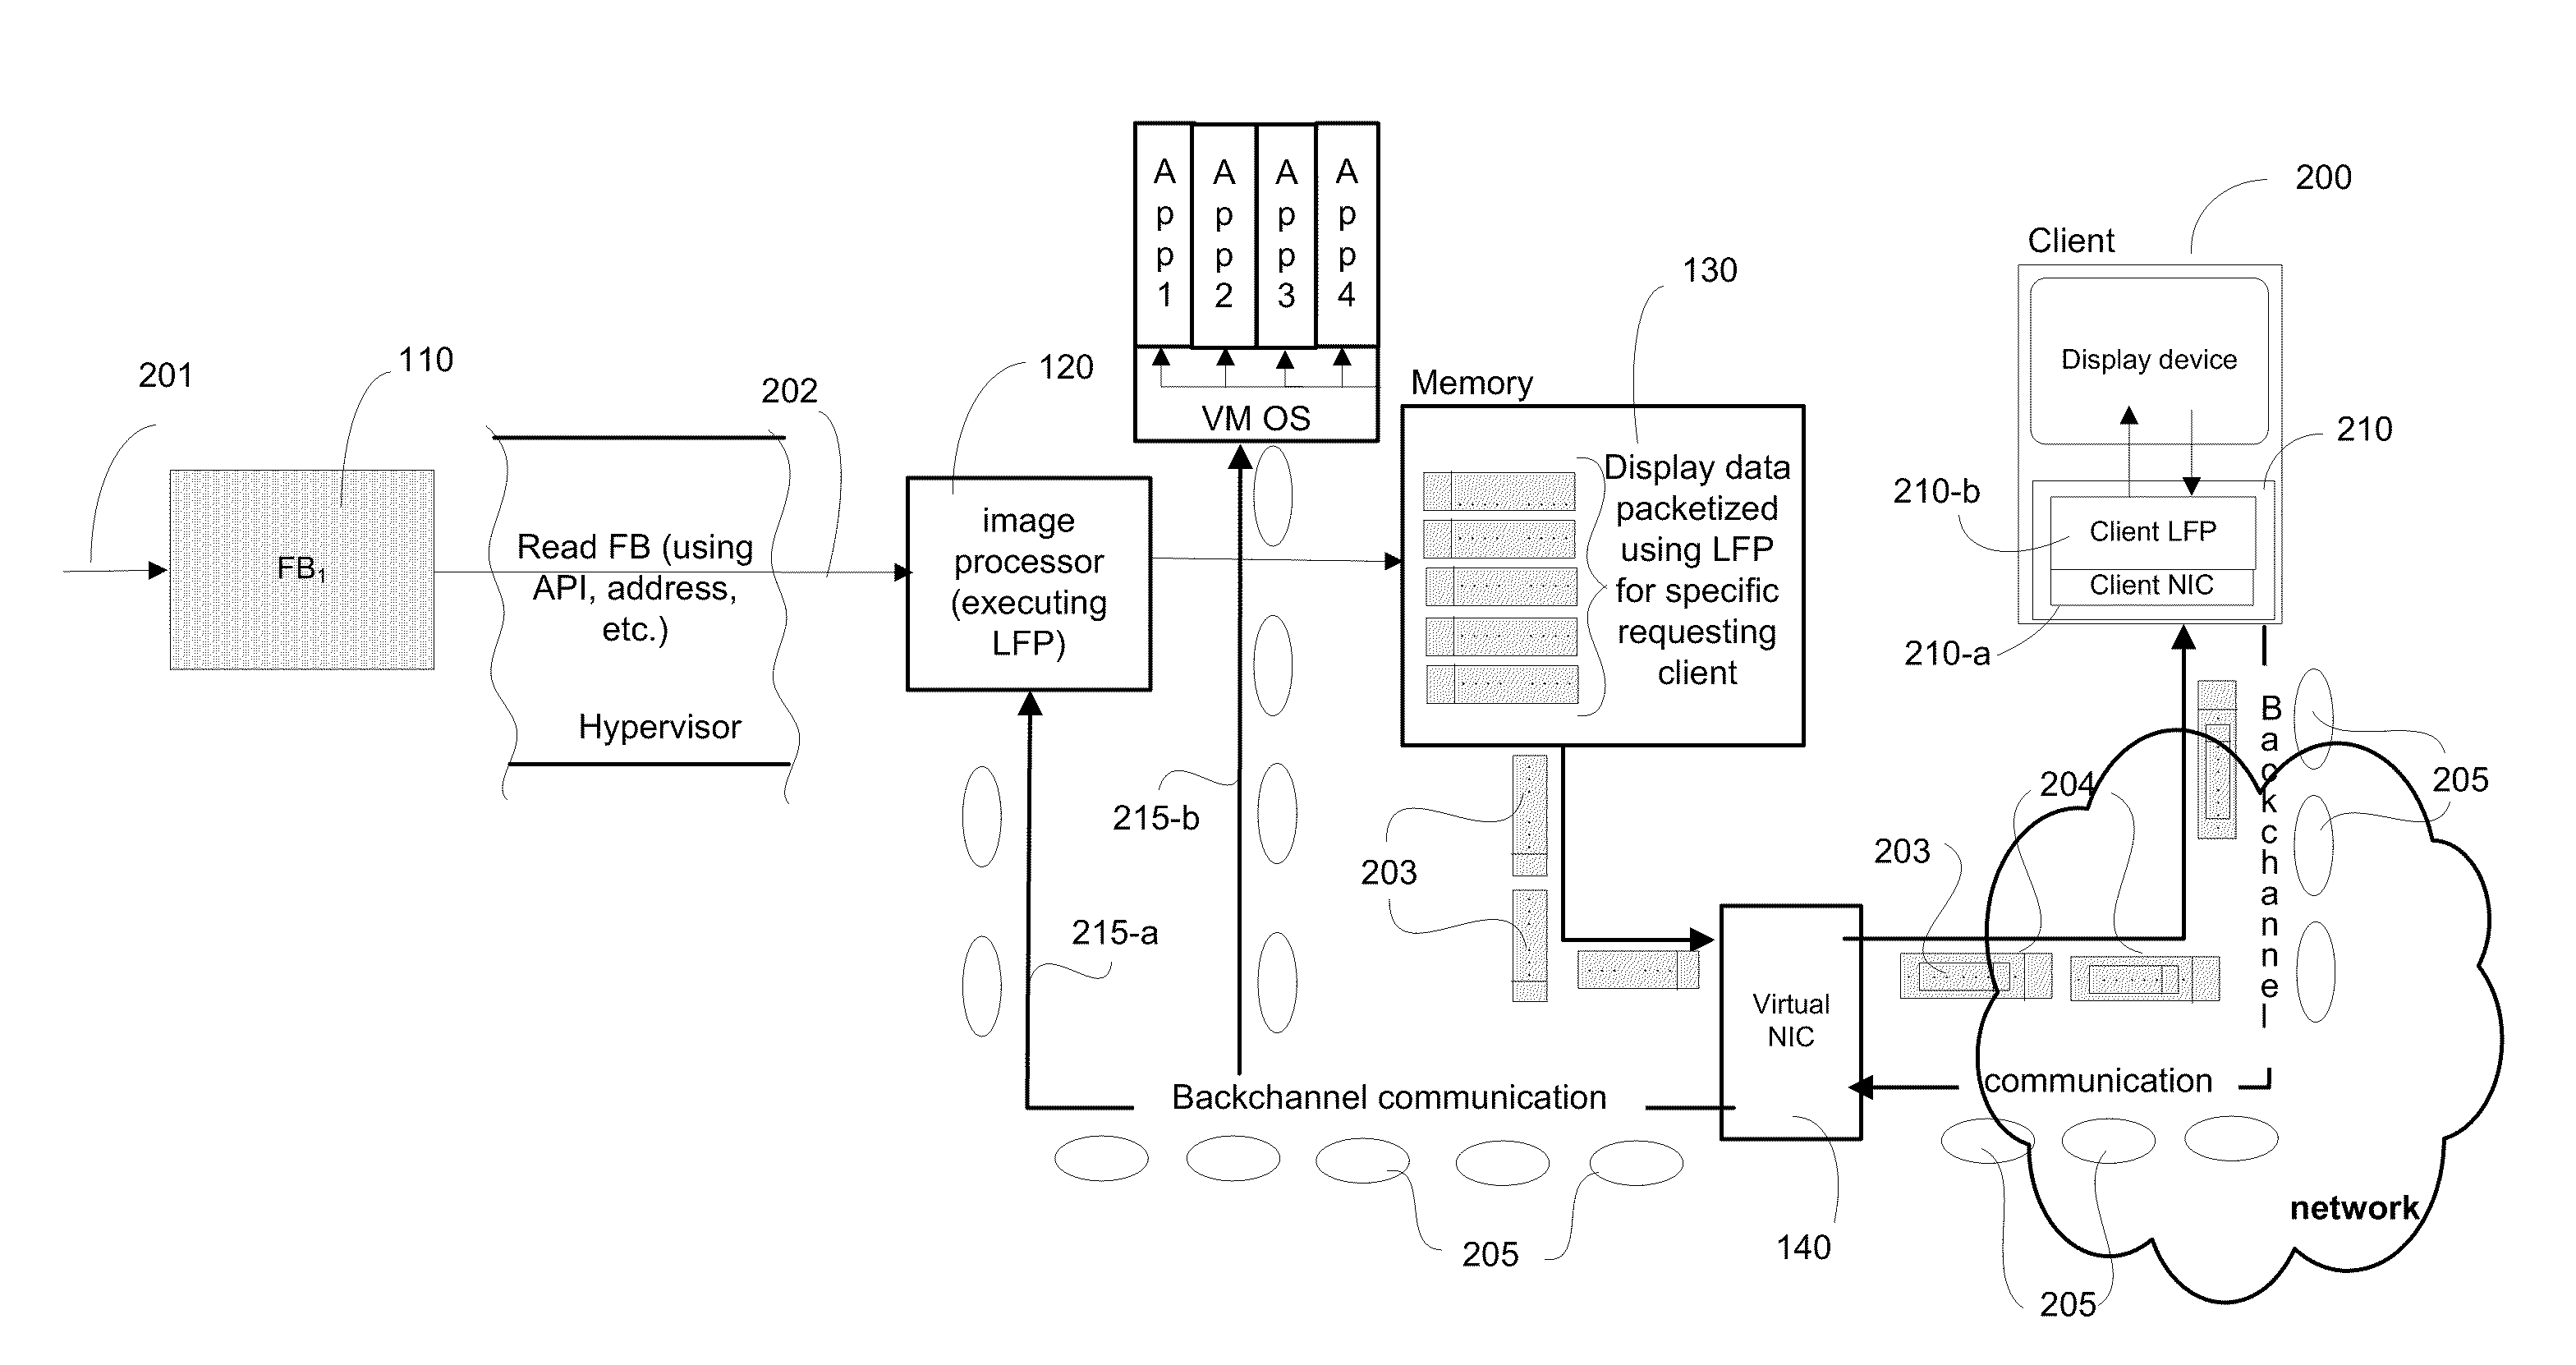 Systems and Algorithm For Interfacing With A Virtualized Computing Service Over A Network Using A Lightweight Client